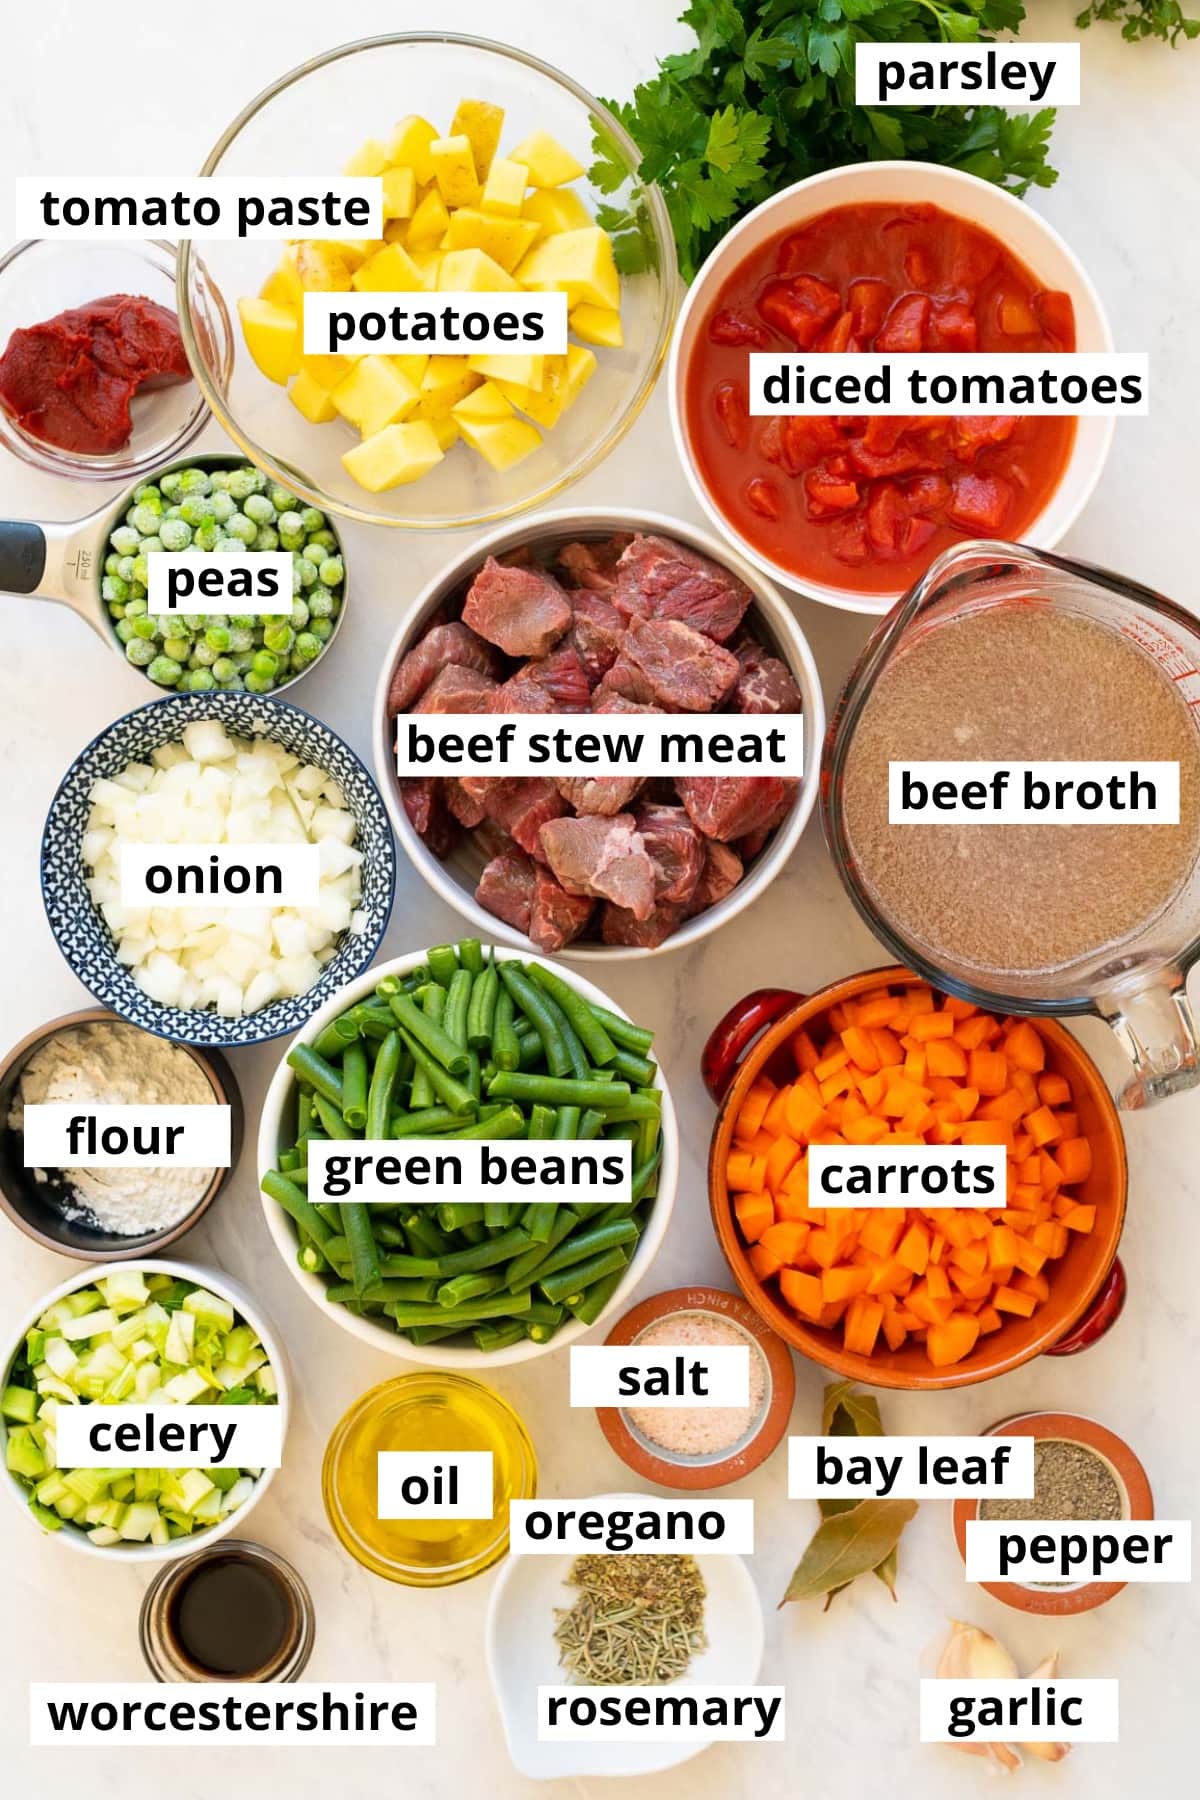 Beef stew meat, green beans, carrots, onion, flour, peas, potatoes, tomatoes, tomato paste, parsley, beef broth, celery, oil, Worcestershire, bay leaf, garlic, spices and oil.